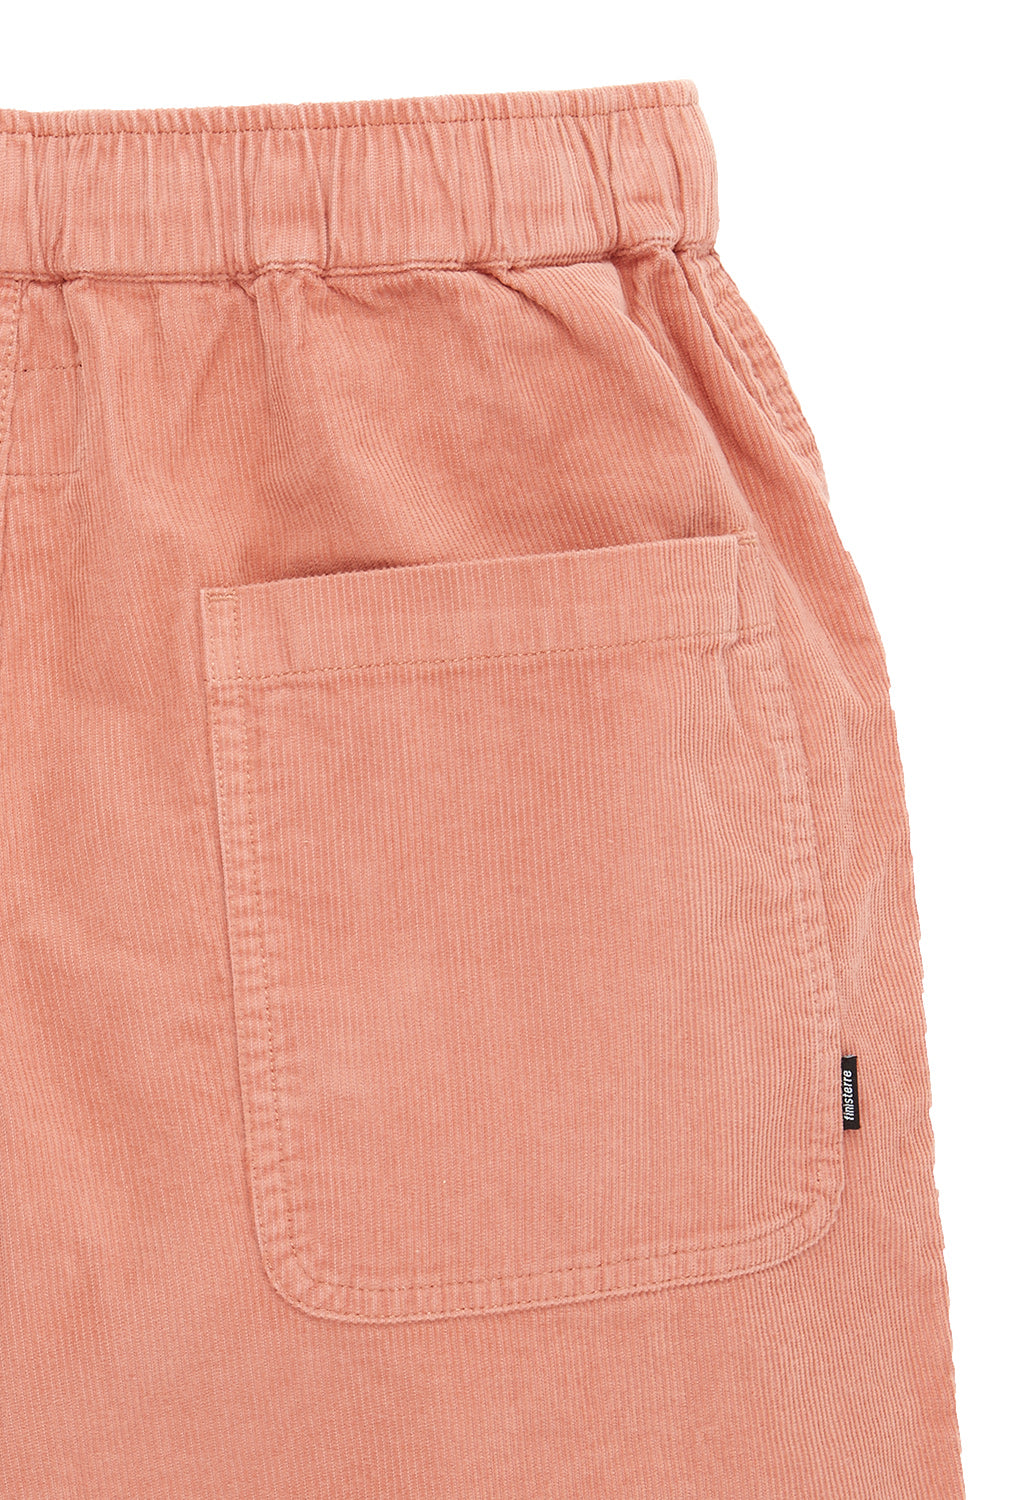 Finisterre Men's Jetty Cord Shorts - Clay